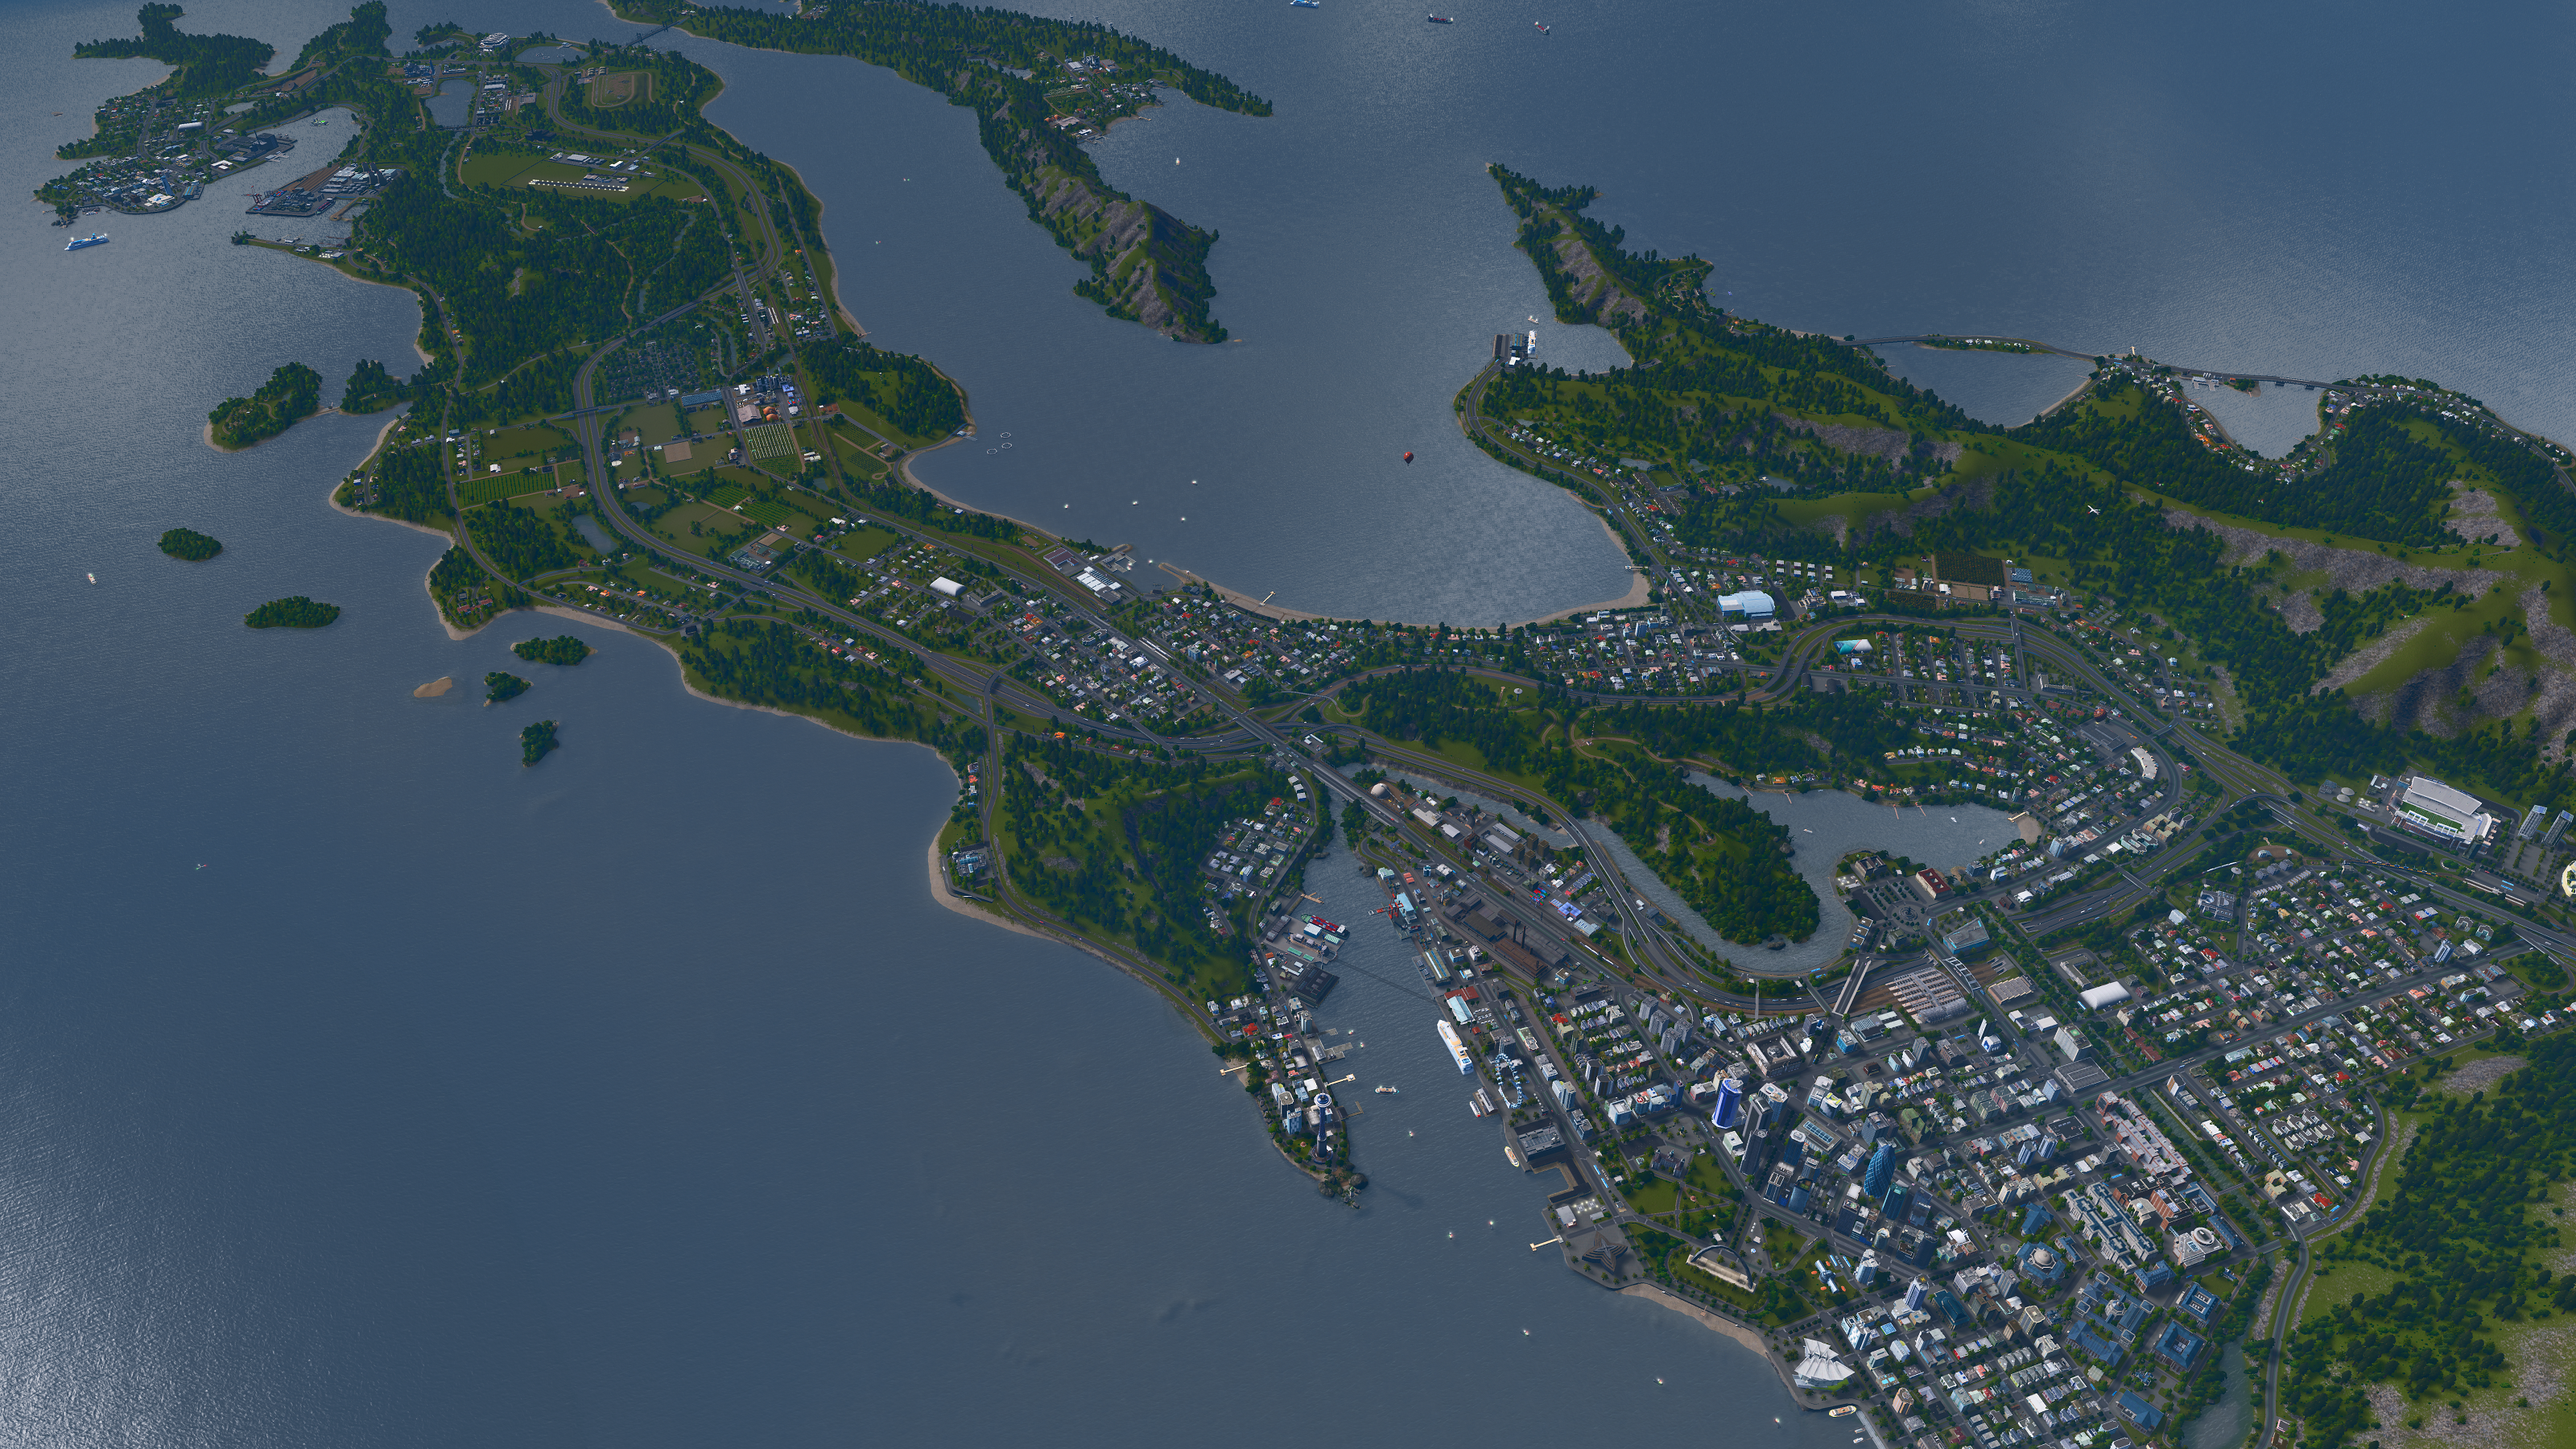 r/CitiesSkylines - Who else likes building "countries" with separate cities/towns?